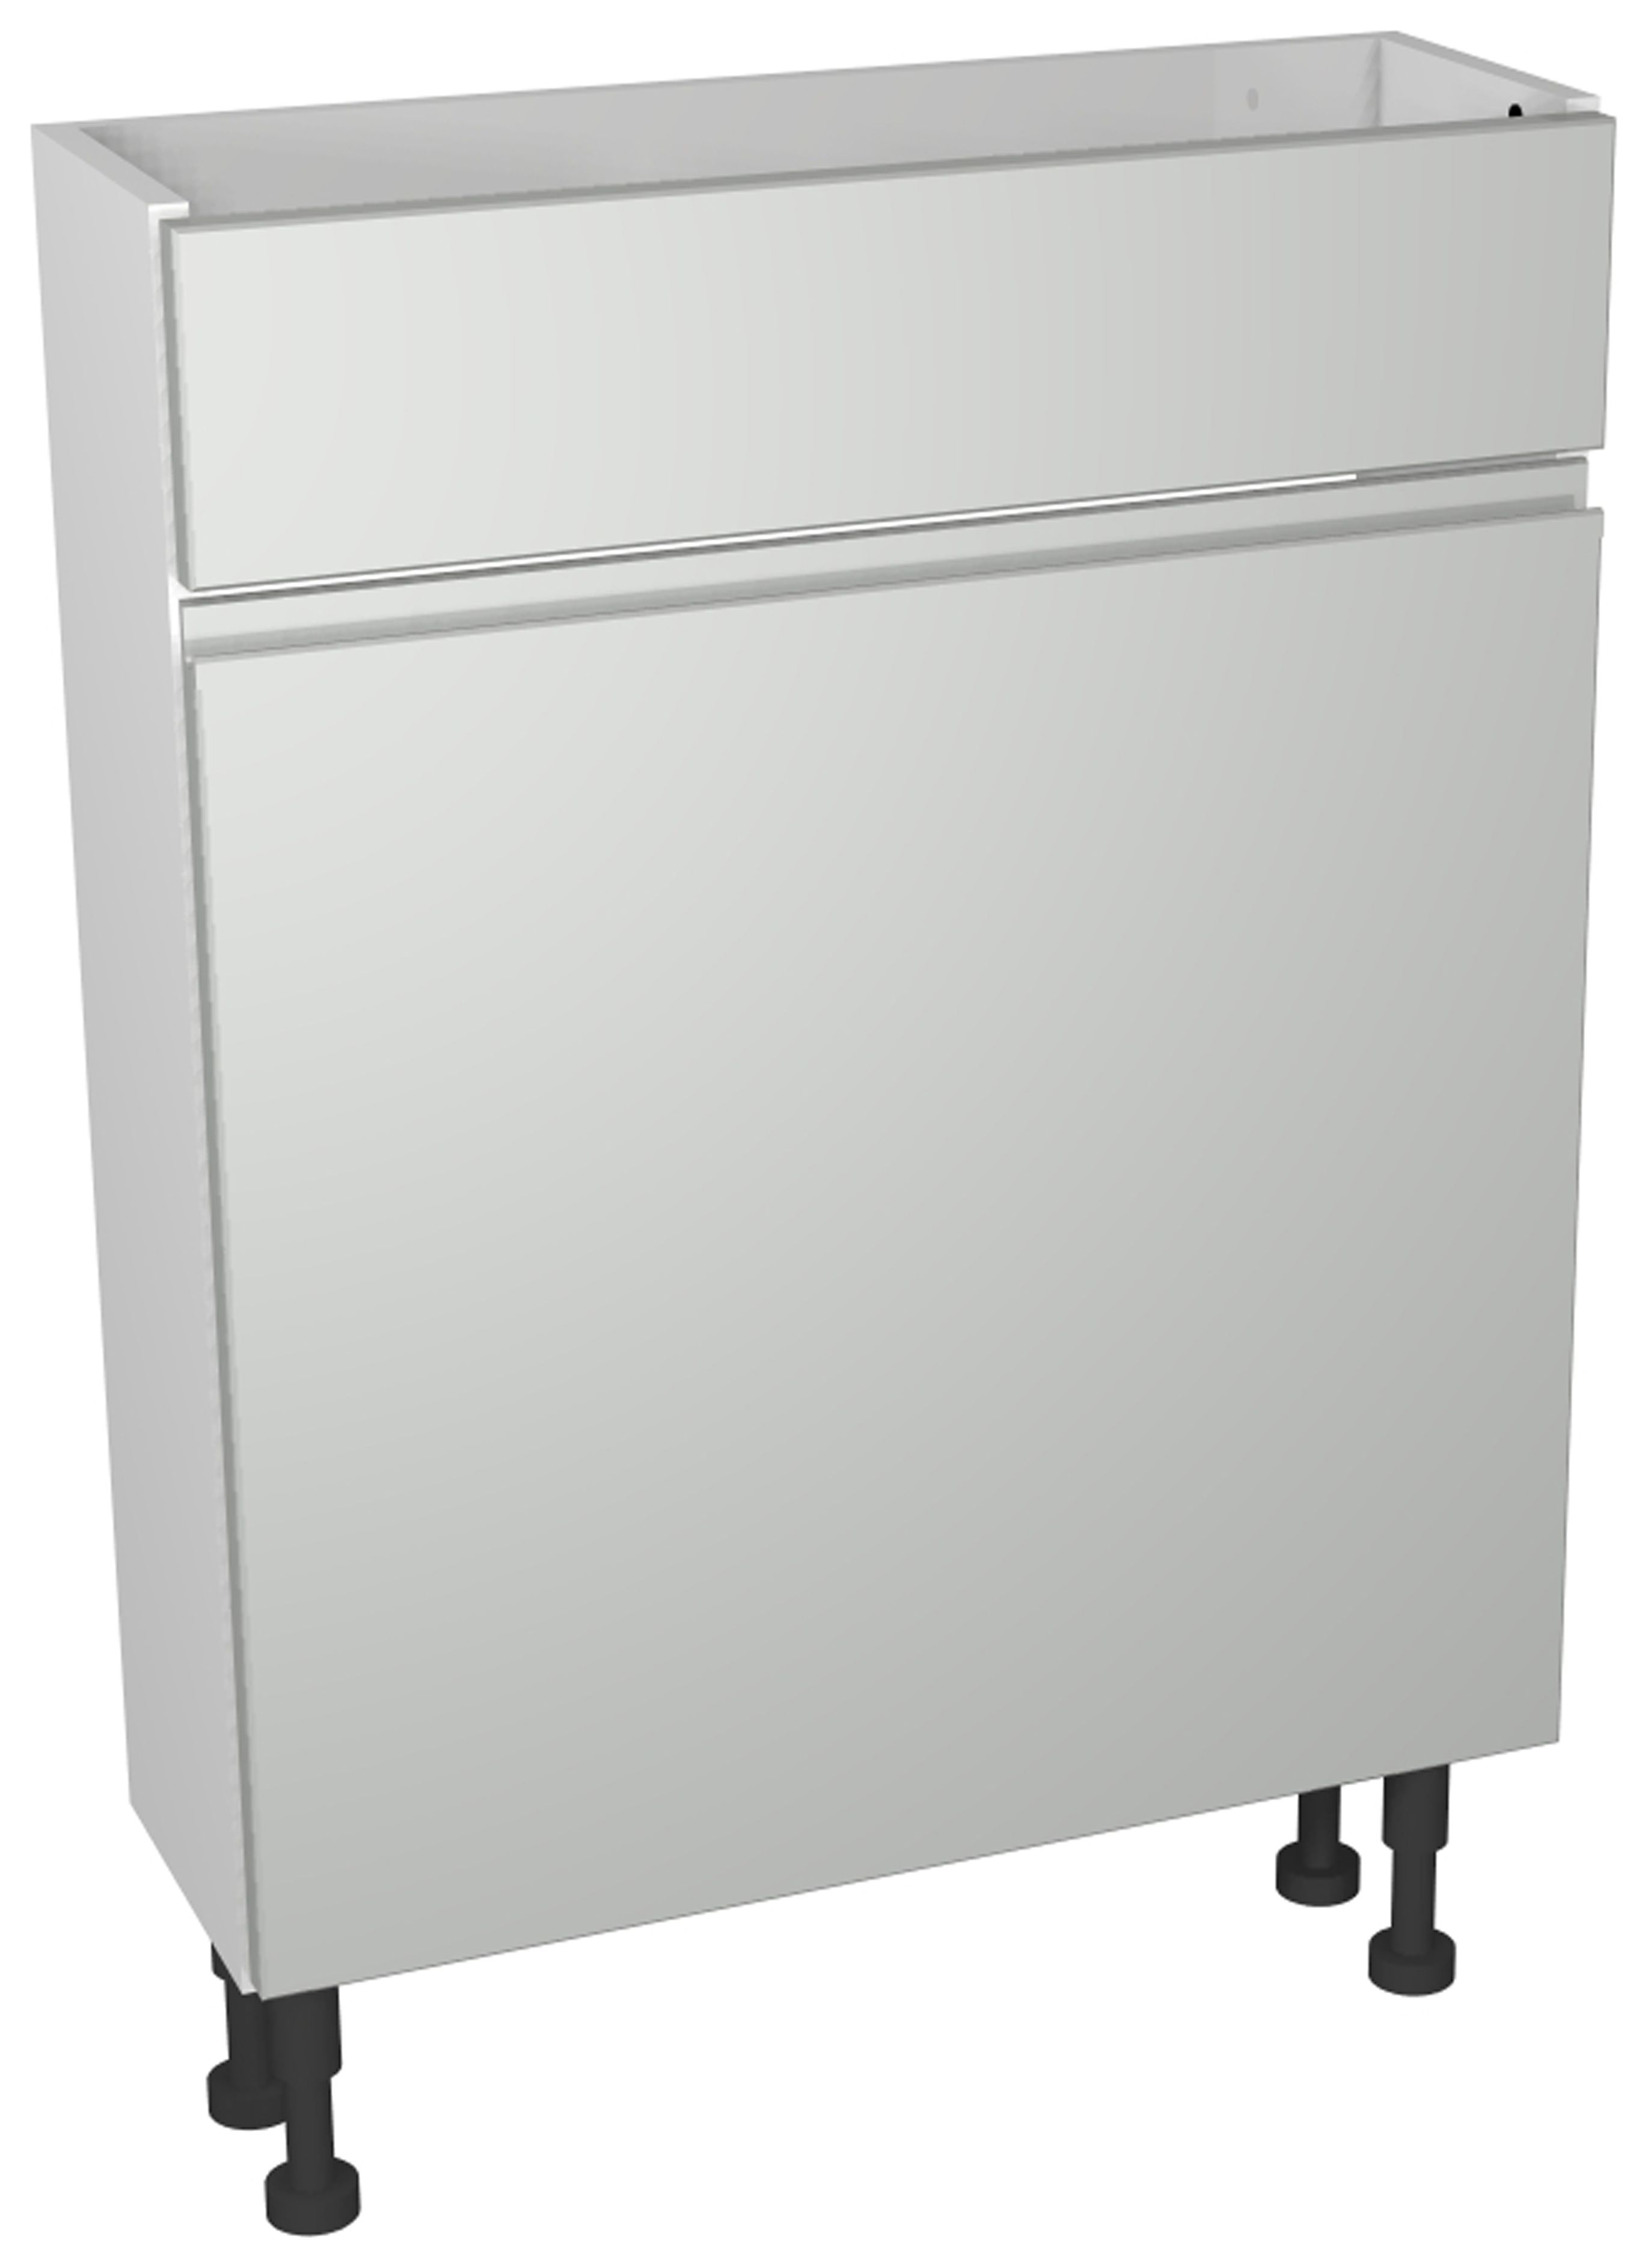 Image of Wickes Hertford Gloss Grey Compact Toilet Unit - 600 x 735mm